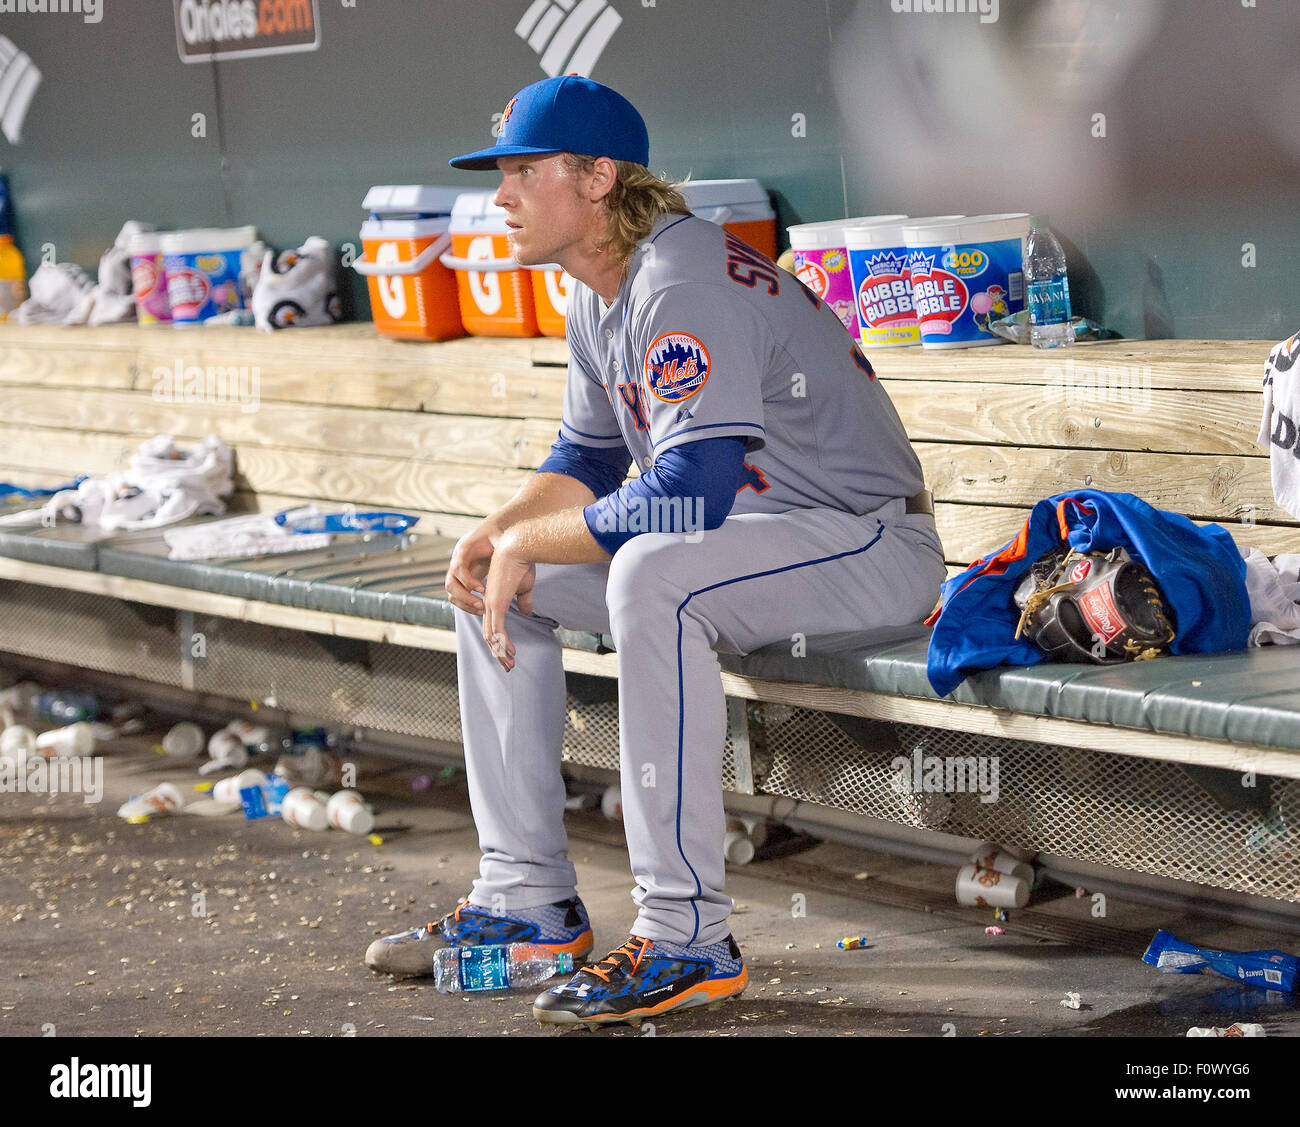 New York Mets starting pitcher Noah Syndergaard (34) sits alone in the dugout after being taken out of the game in the sixth inning against the Baltimore Orioles at Oriole Park at Camden Yards in Baltimore, Maryland on Wednesday, August 19, 2015. The Orioles won the game 5 - 4. Credit: Ron Sachs/CNP (RESTRICTION: NO New York or New Jersey Newspapers or newspapers within a 75 mile radius of New York City) - NO WIRE SERVICE - Stock Photo